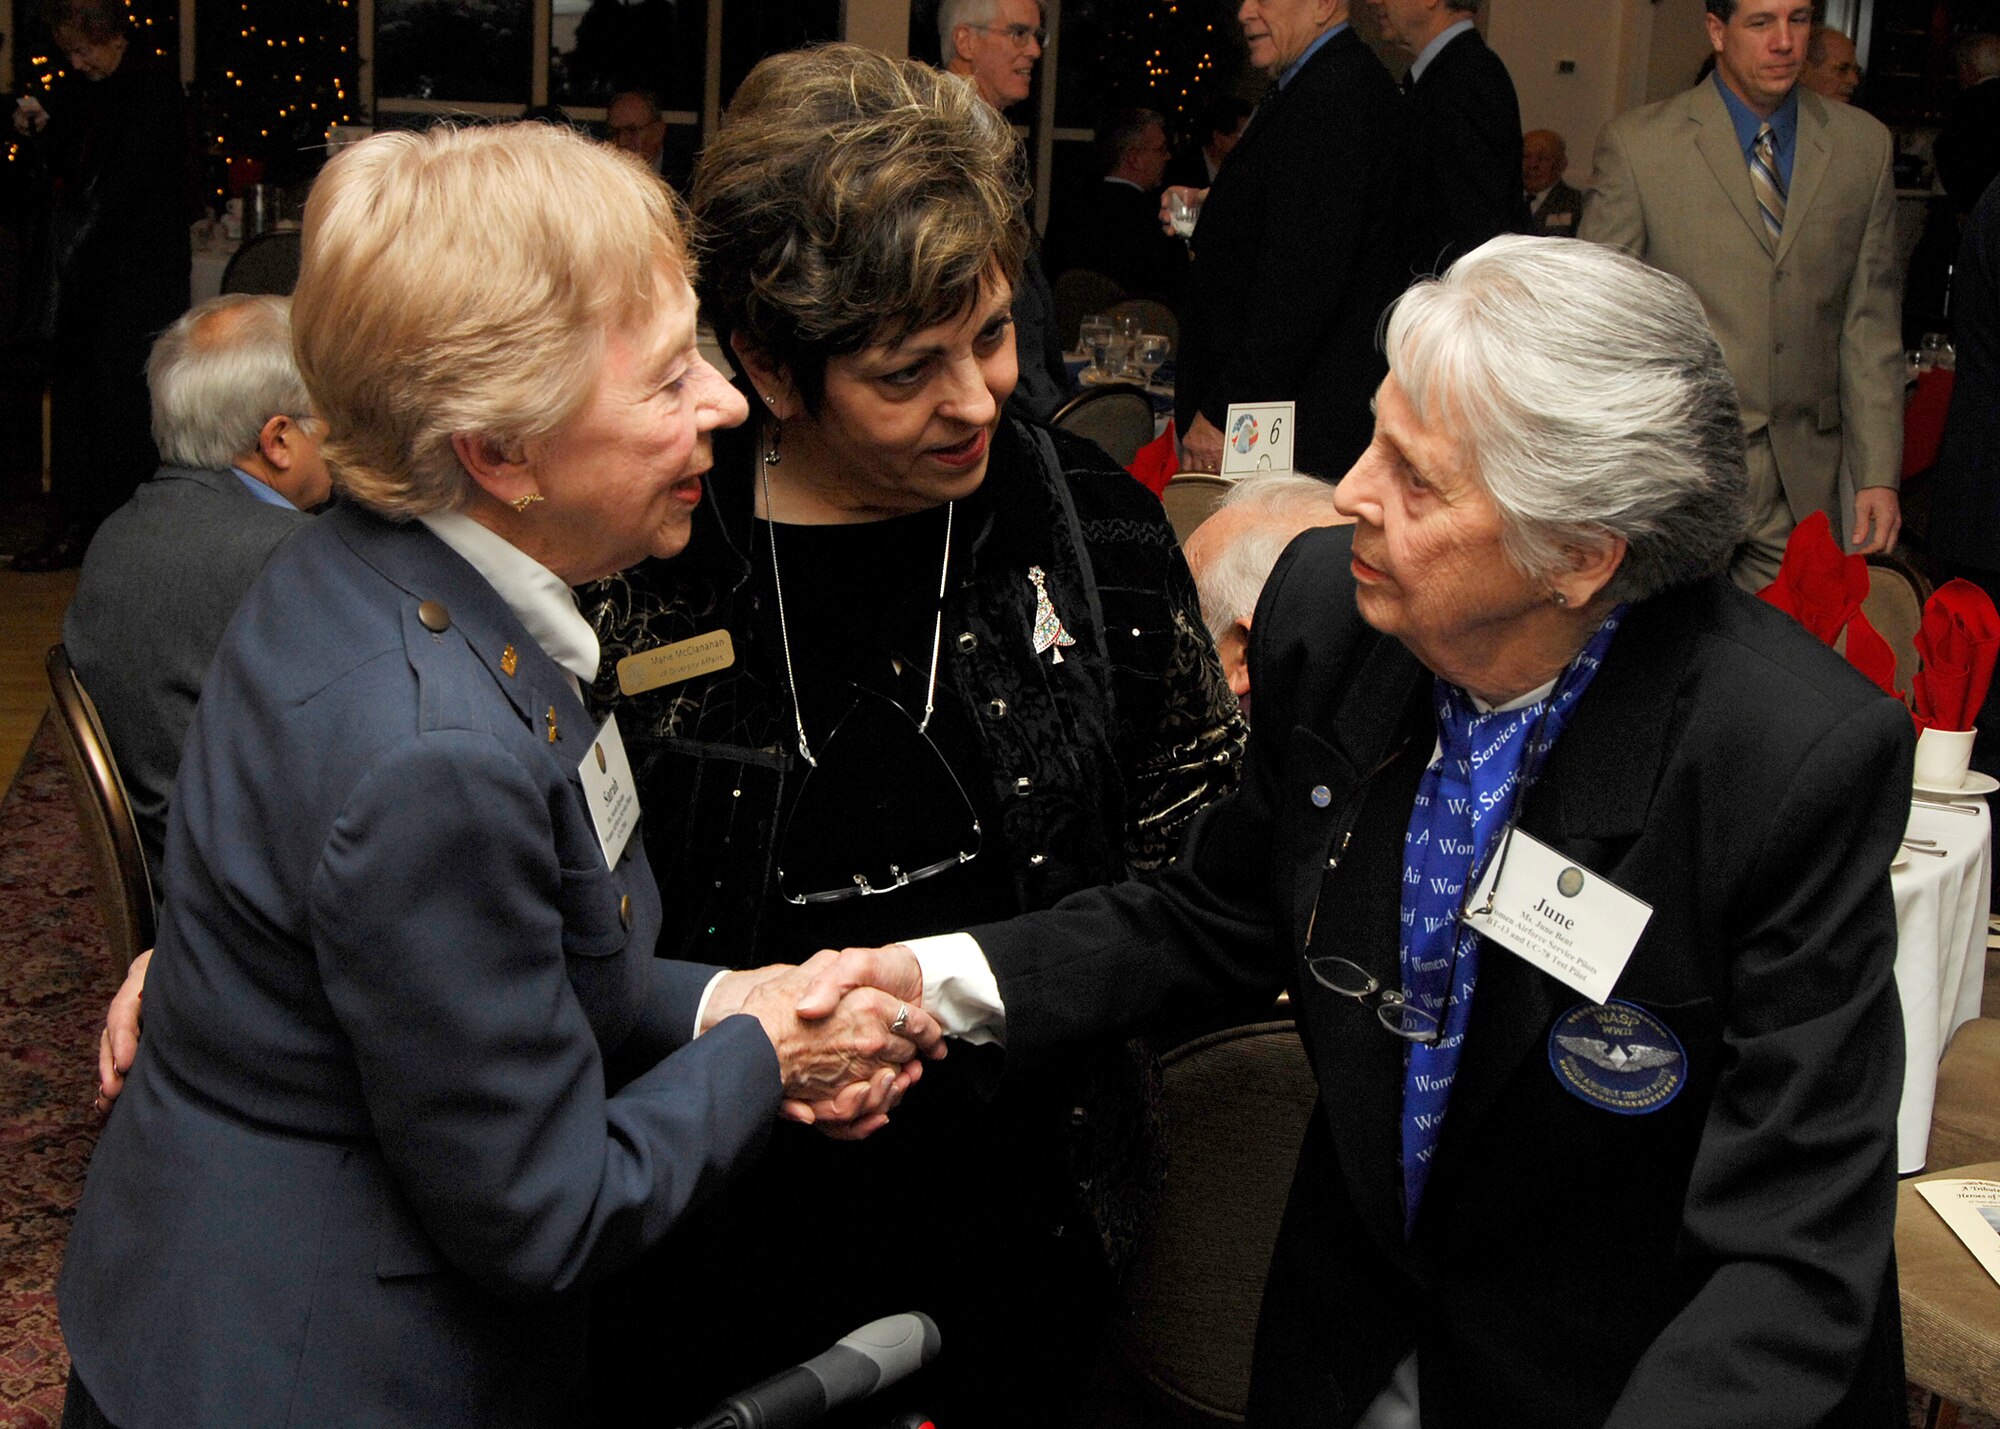 Sara Hayden, Marie McClanahan and June Bent mingle during the evening’s social hour. Ms. Hayden and Ms. Bent were members of the Women Airforce Service Pilots during World War II. (US Air Force Photo by Mark Wyatt)